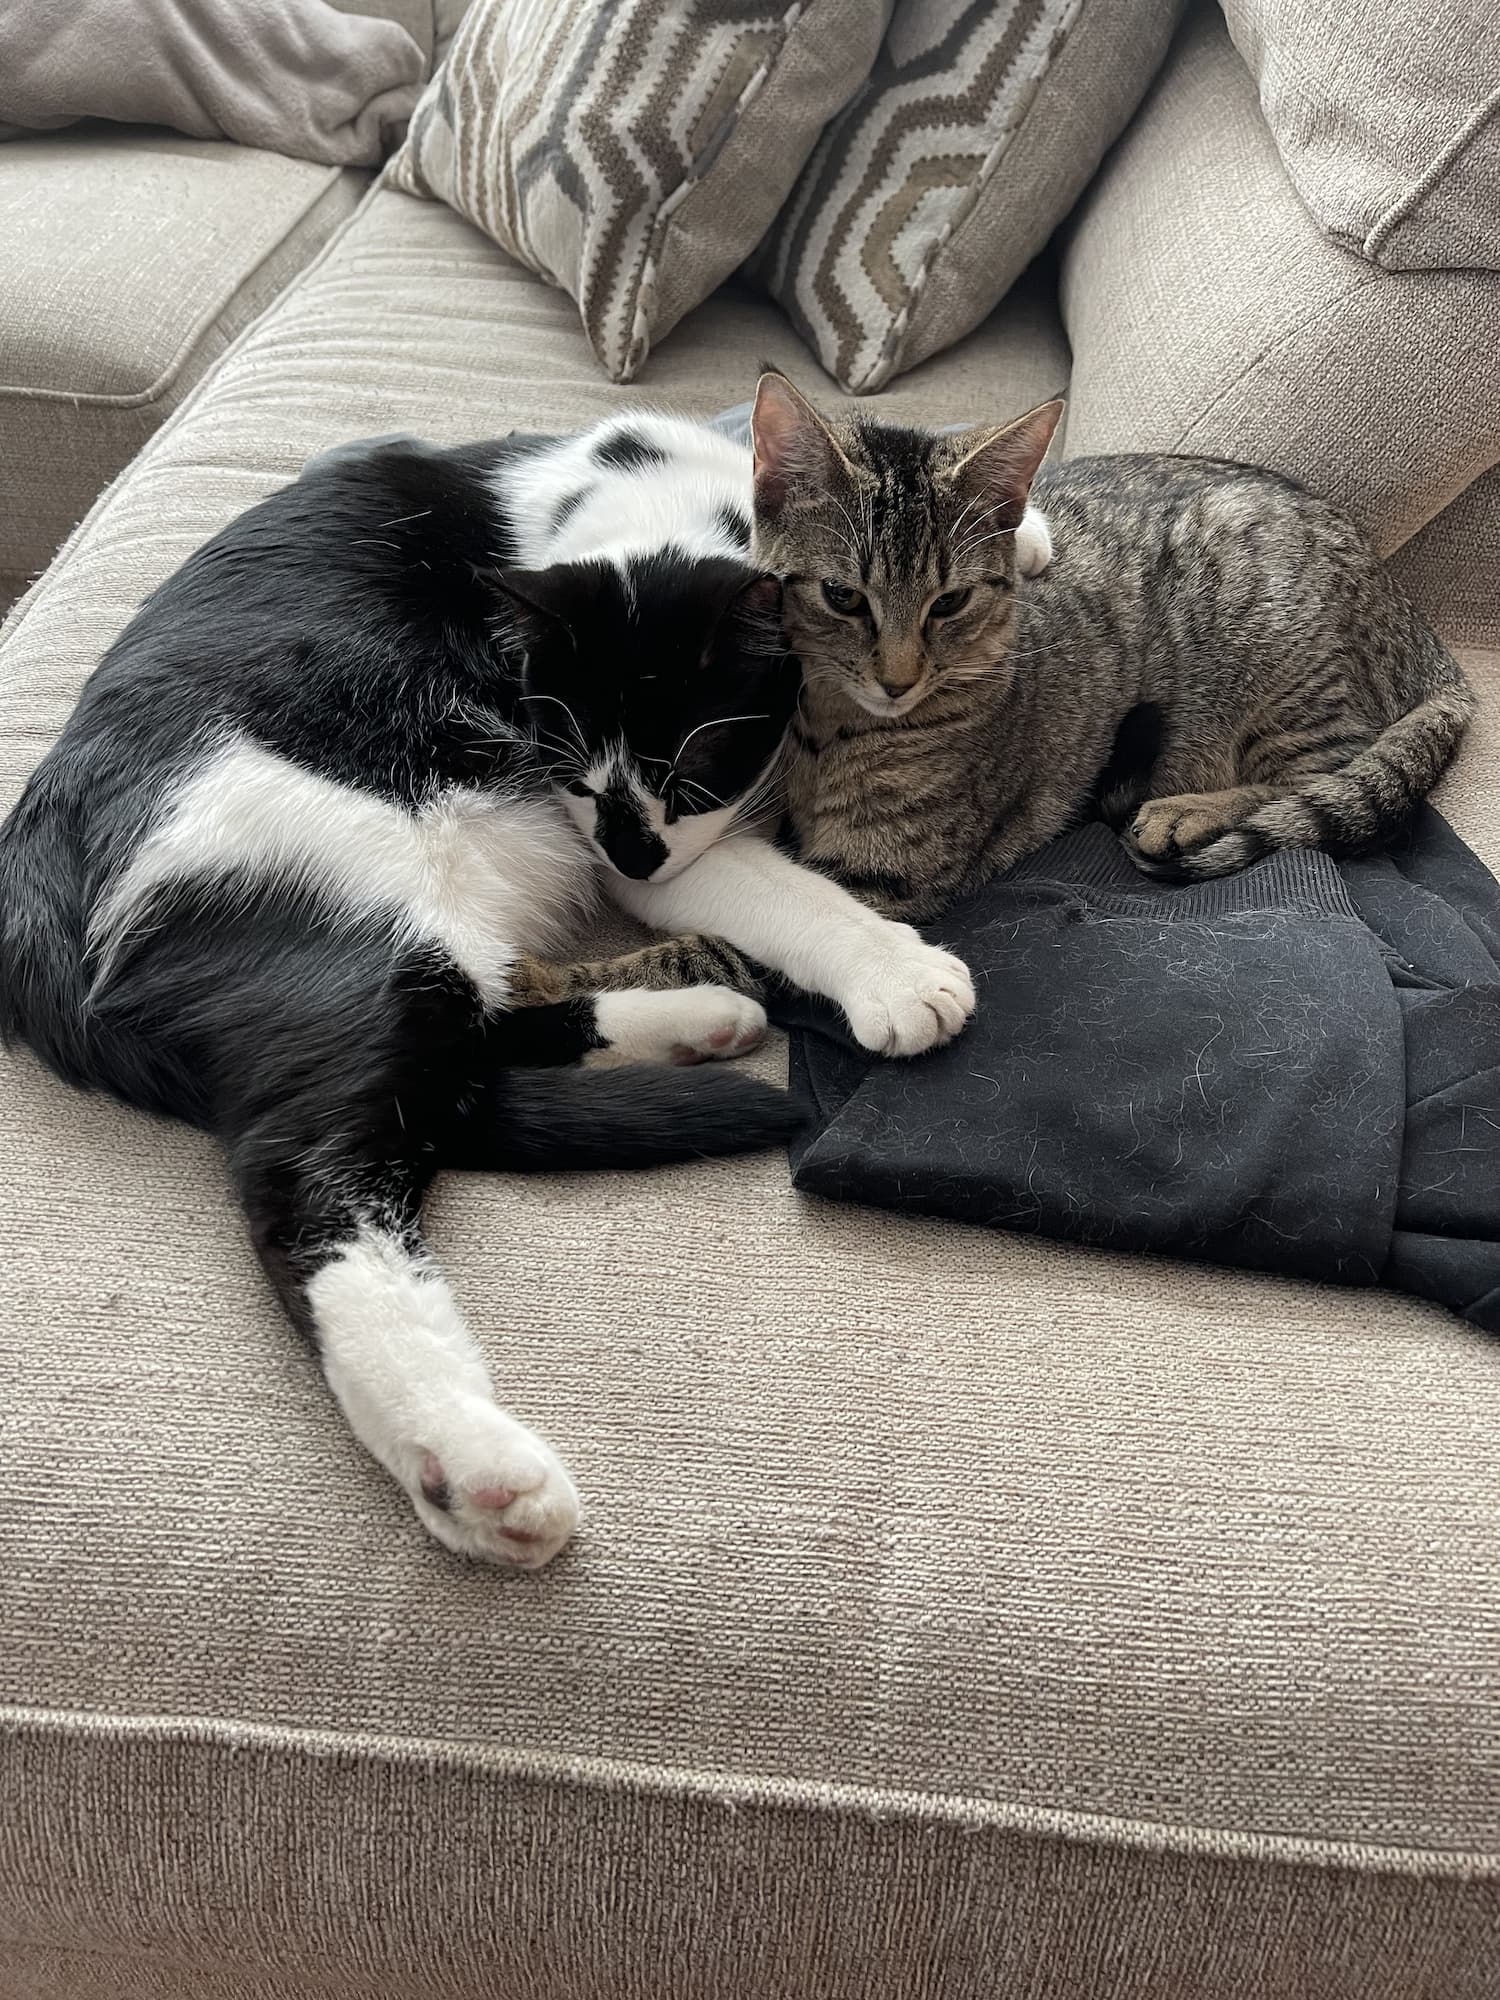 Two cats snuggling on the edge of a couch.